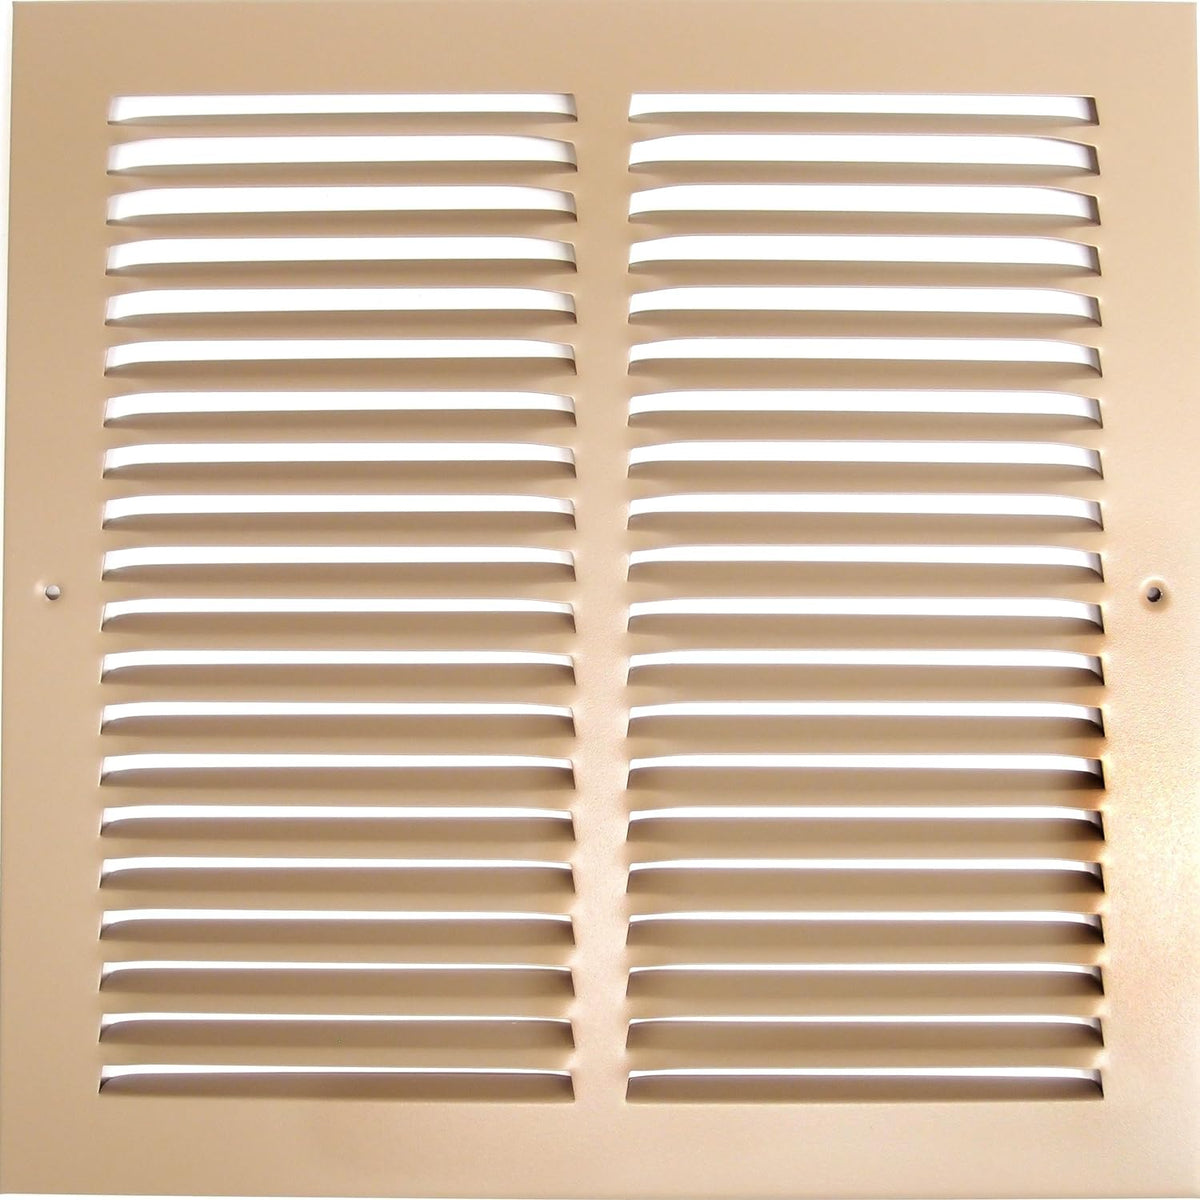 10&quot; X 6&quot; Air Vent Return Grilles - Sidewall and Ceiling - HVAC VENT DUCT COVER DIFFUSER - Steel